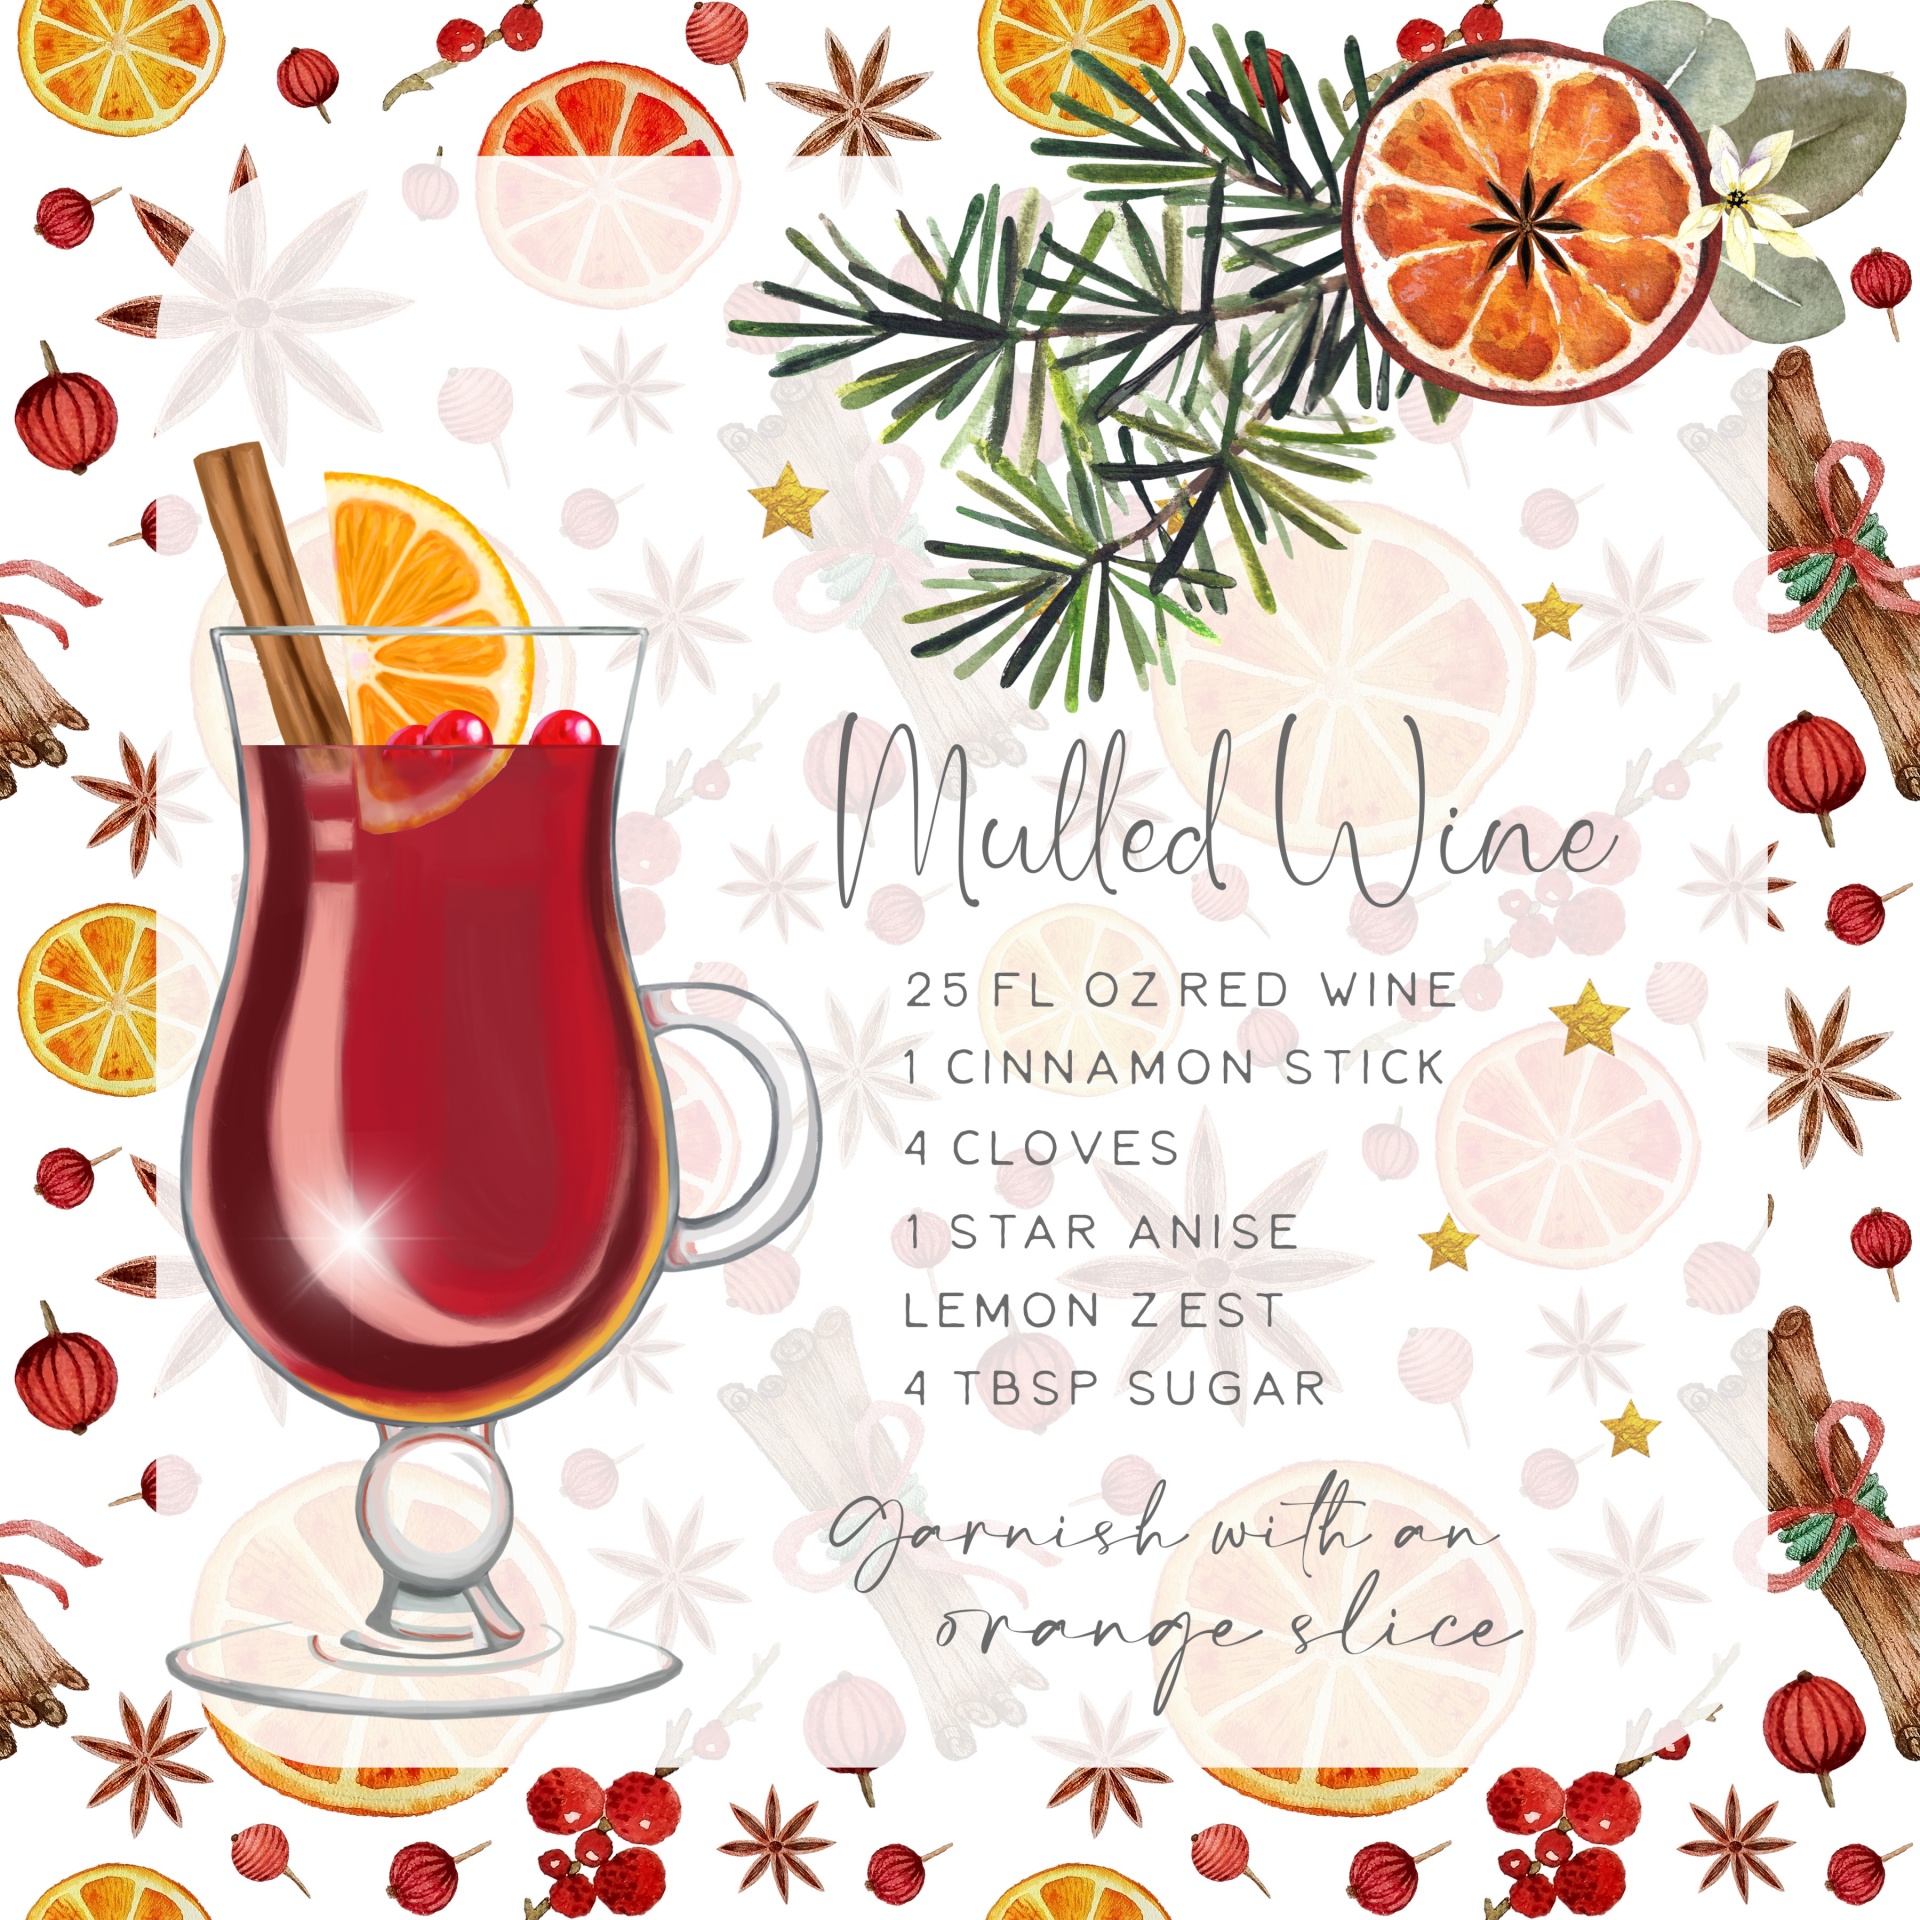 recipe in ounces for a festive alcoholic drink with red wine, anise, lemon zest, cinnamon and sugar